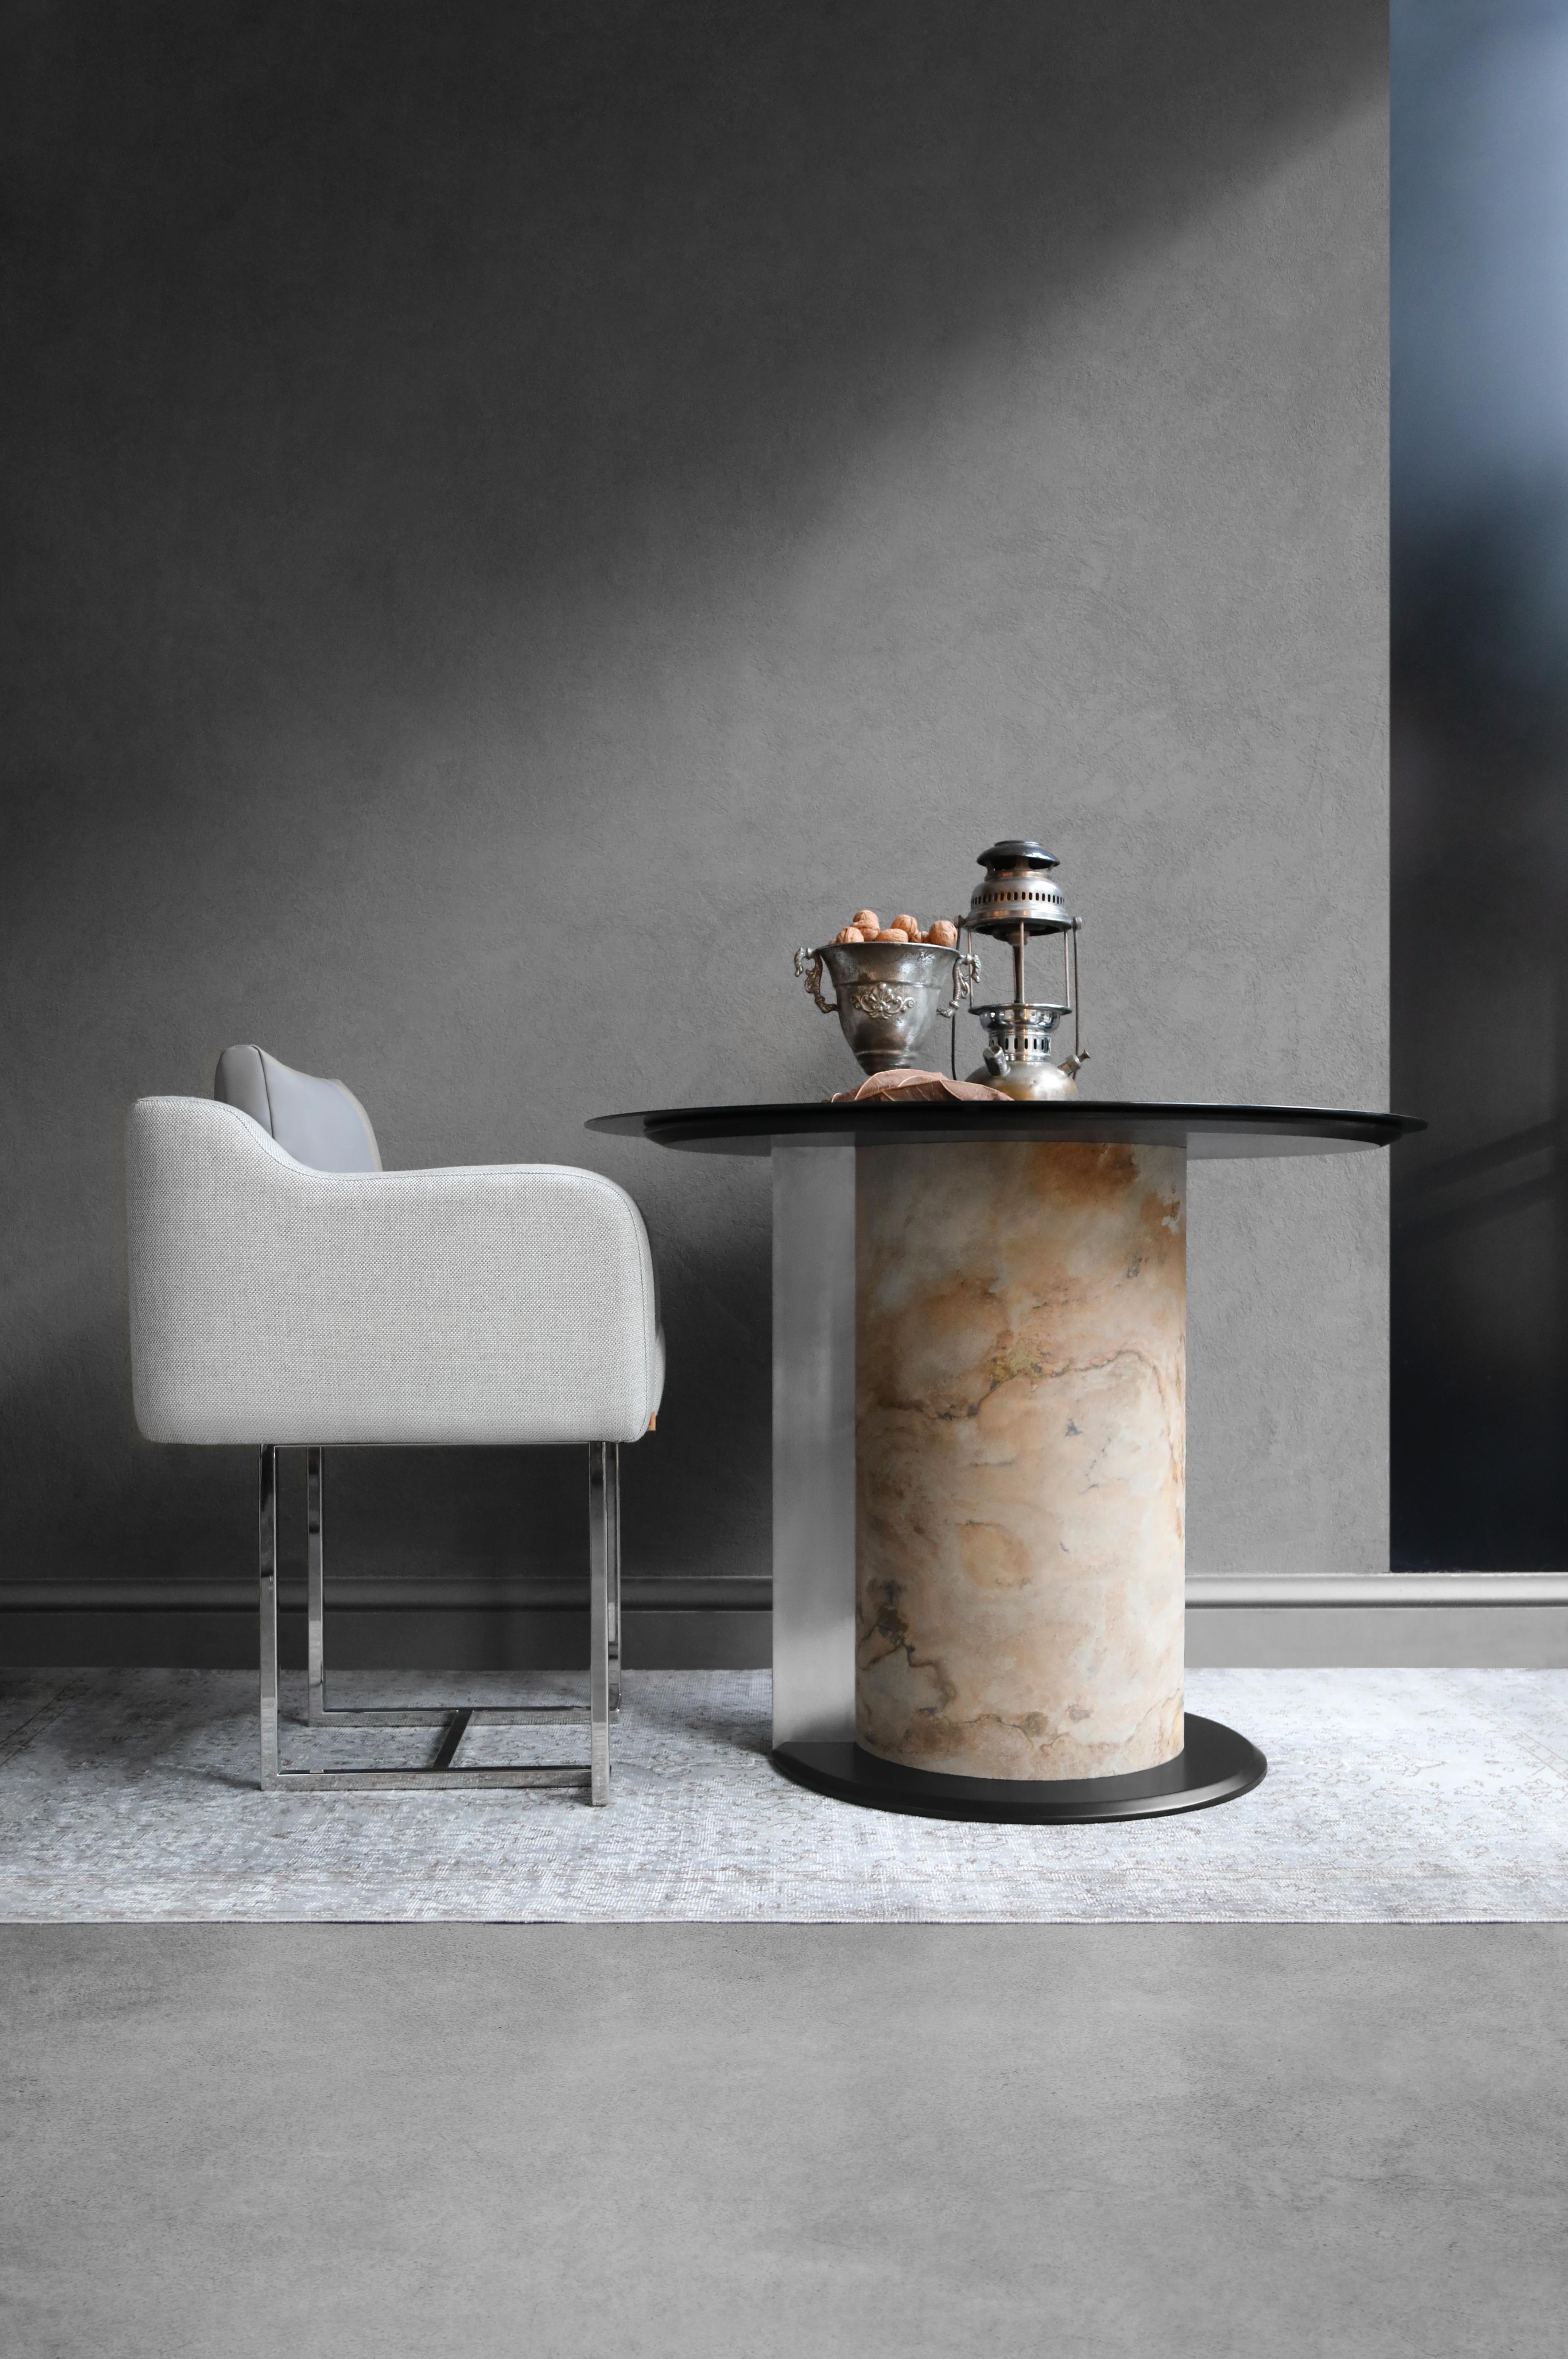 Get harmony in your home with TIM TABLE, which combines cirucular body, glass top, wood and metal details with different materials... 

Combining lagu's signature materials, brass and black glass, TIM TABLE creates an impact much larger than its